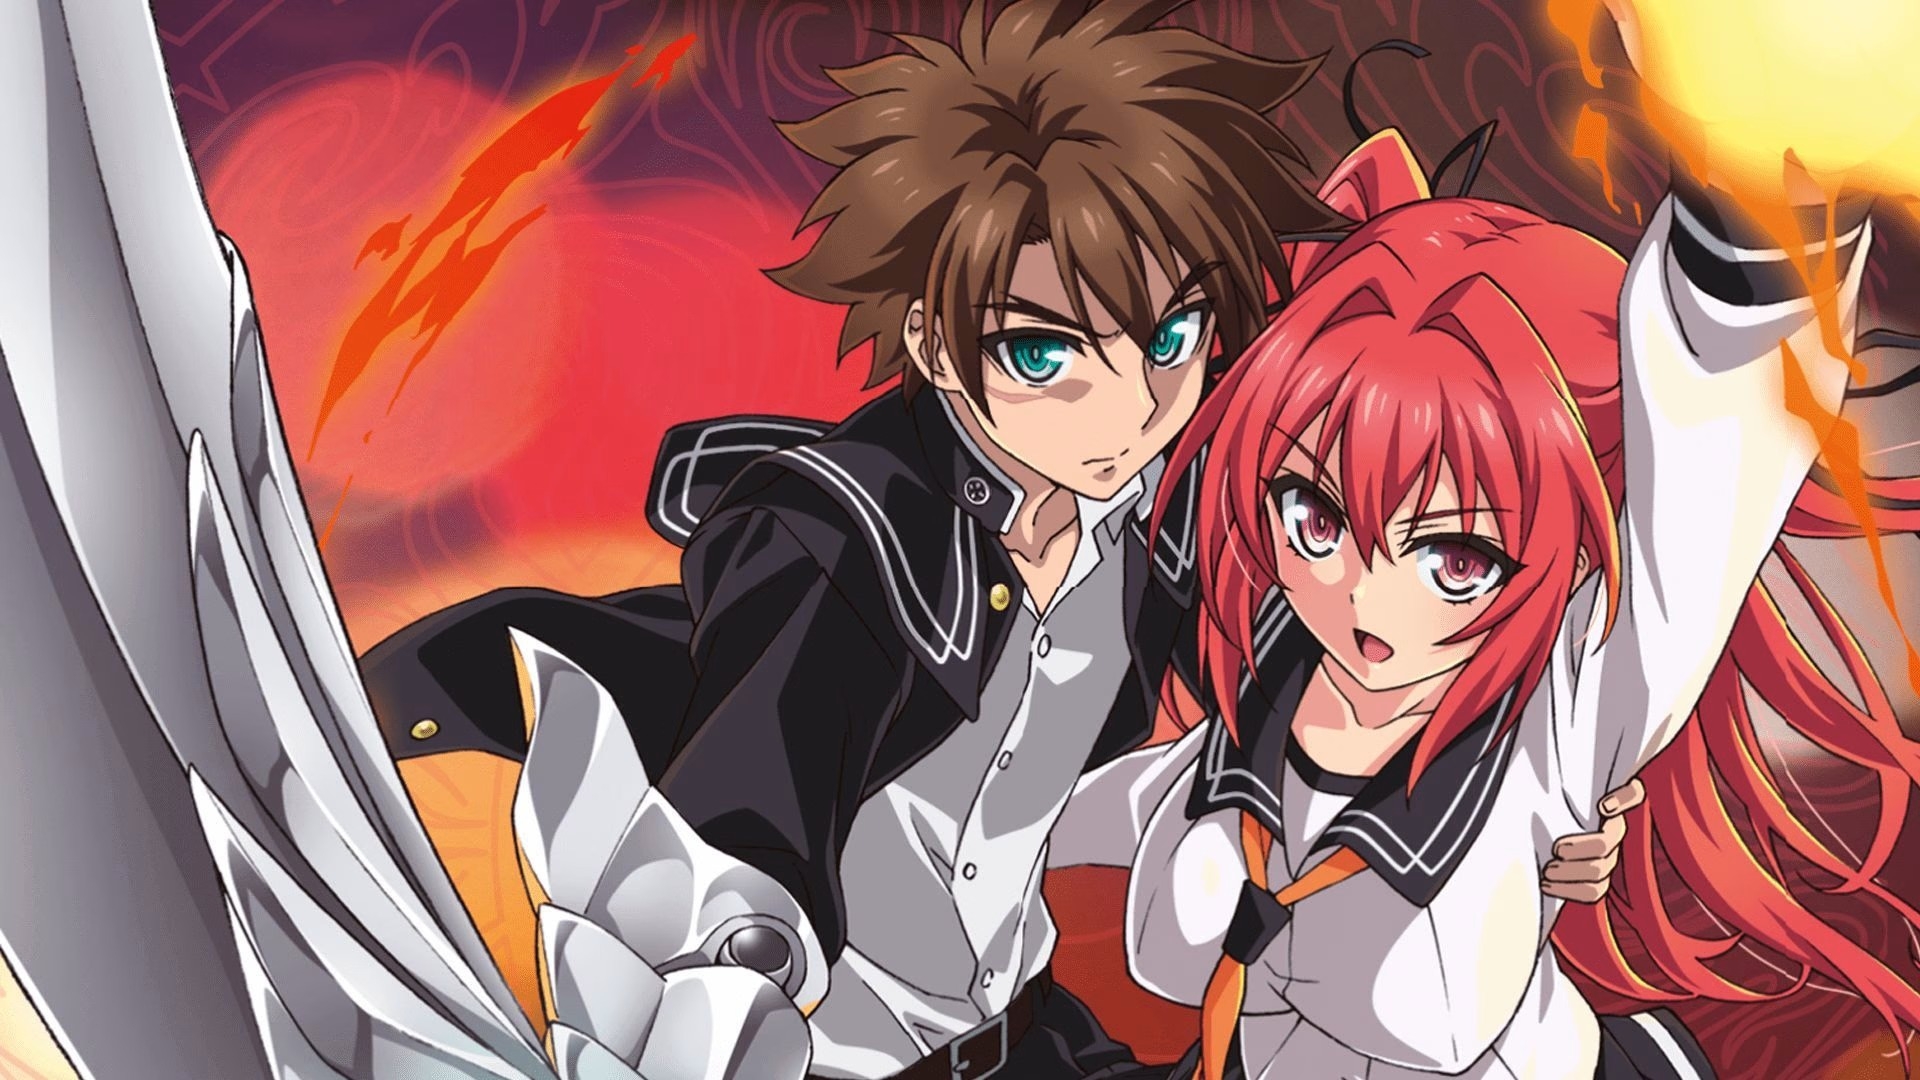 Highschool DxD Season 5 release date, plot, and more • TechBriefly